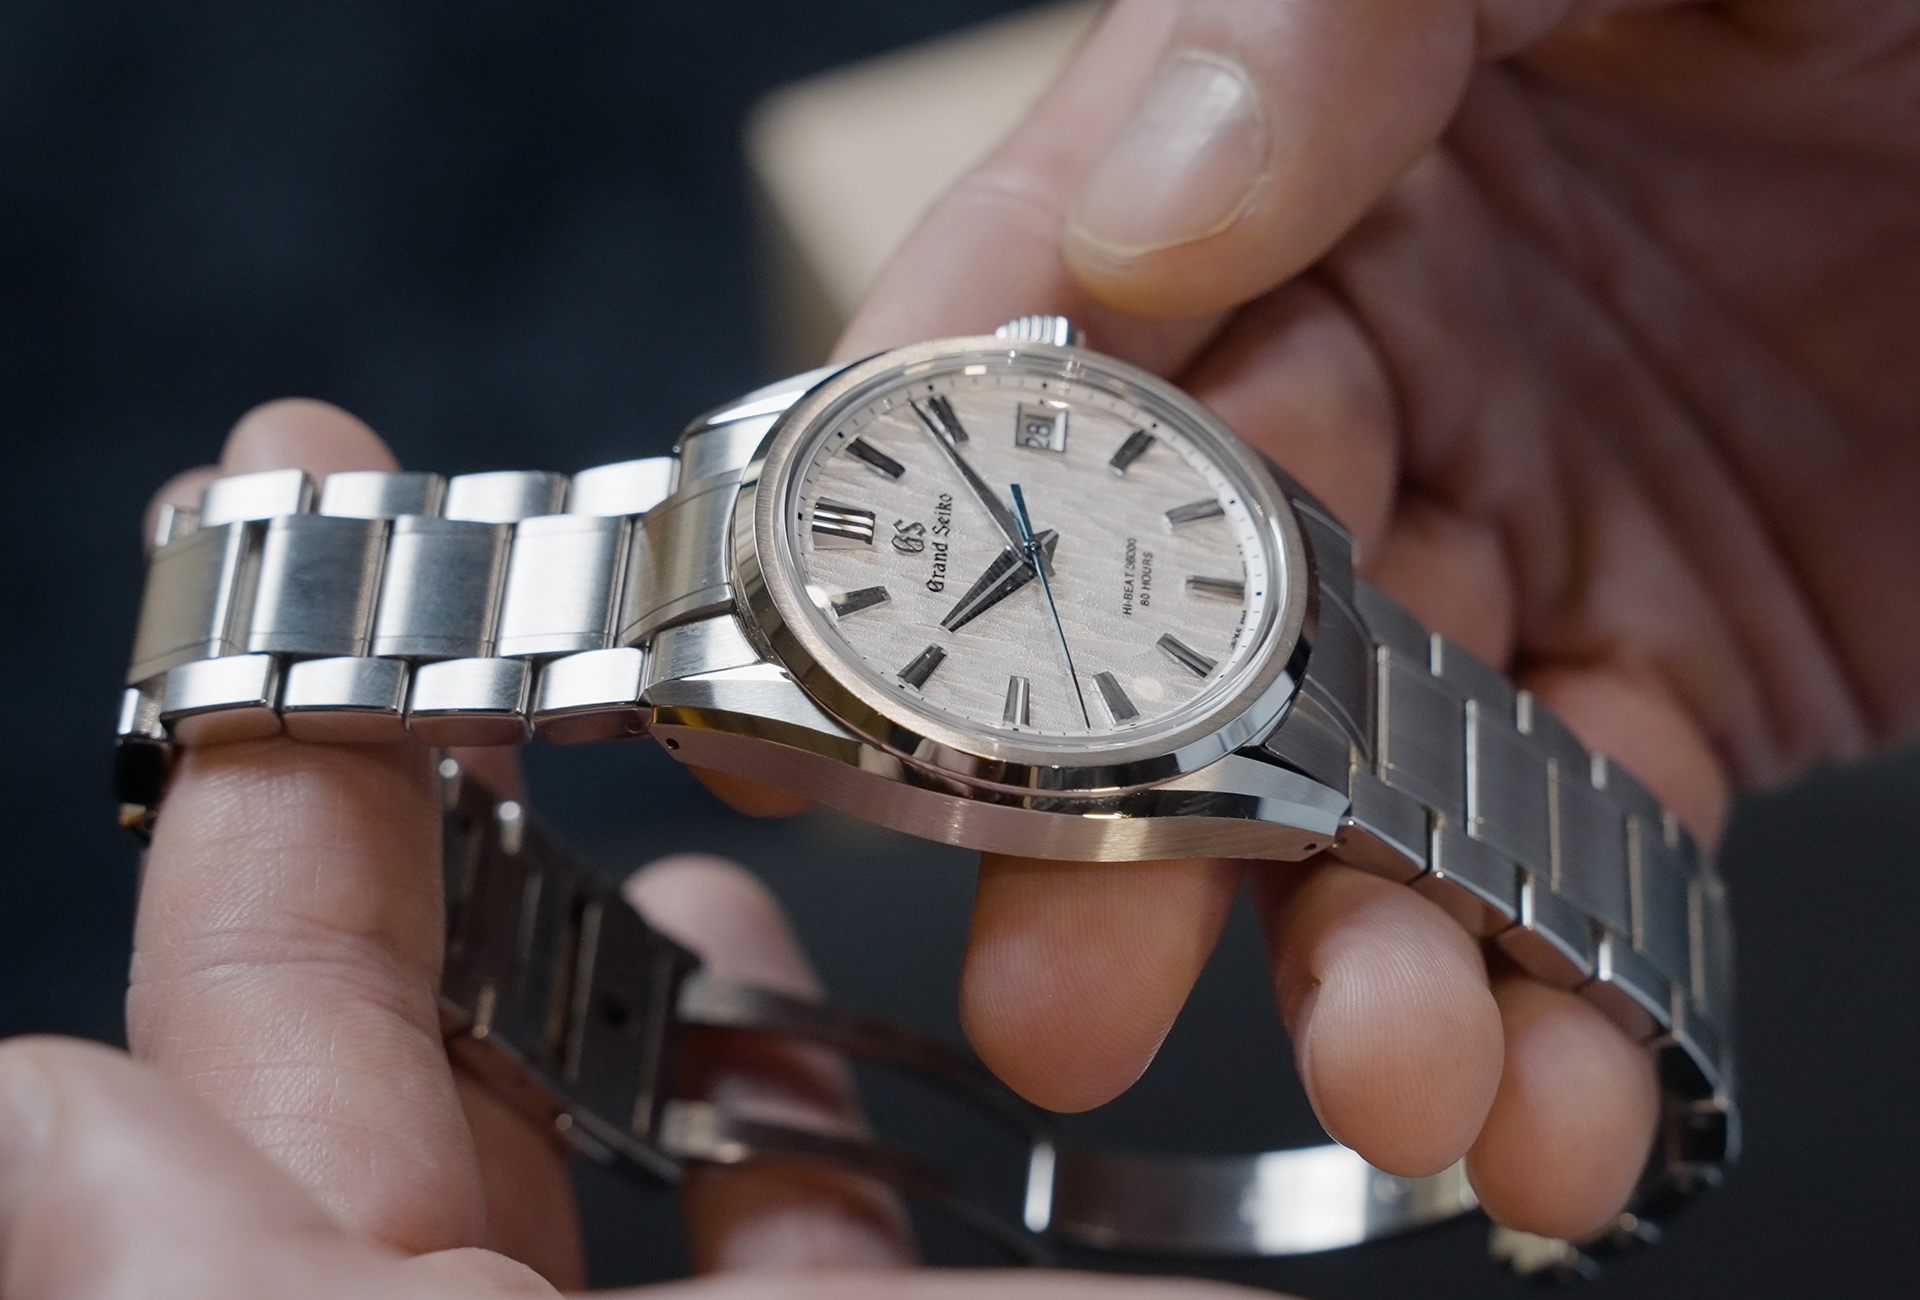 Grand Seiko brings “The Nature of Time” to Watches and Wonders